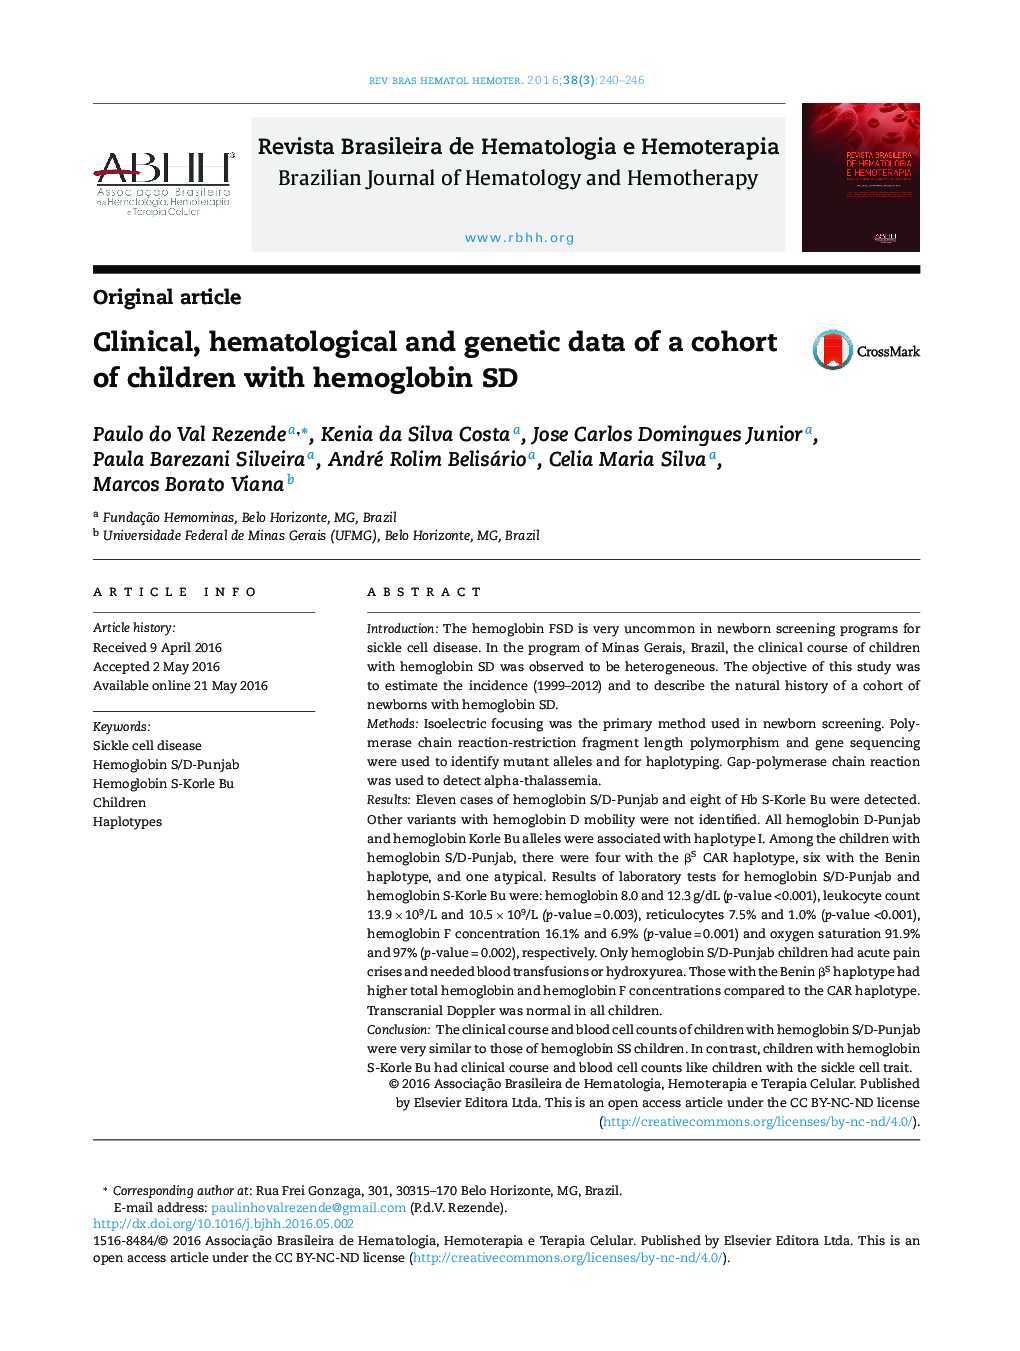 Clinical, hematological and genetic data of a cohort of children with hemoglobin SD